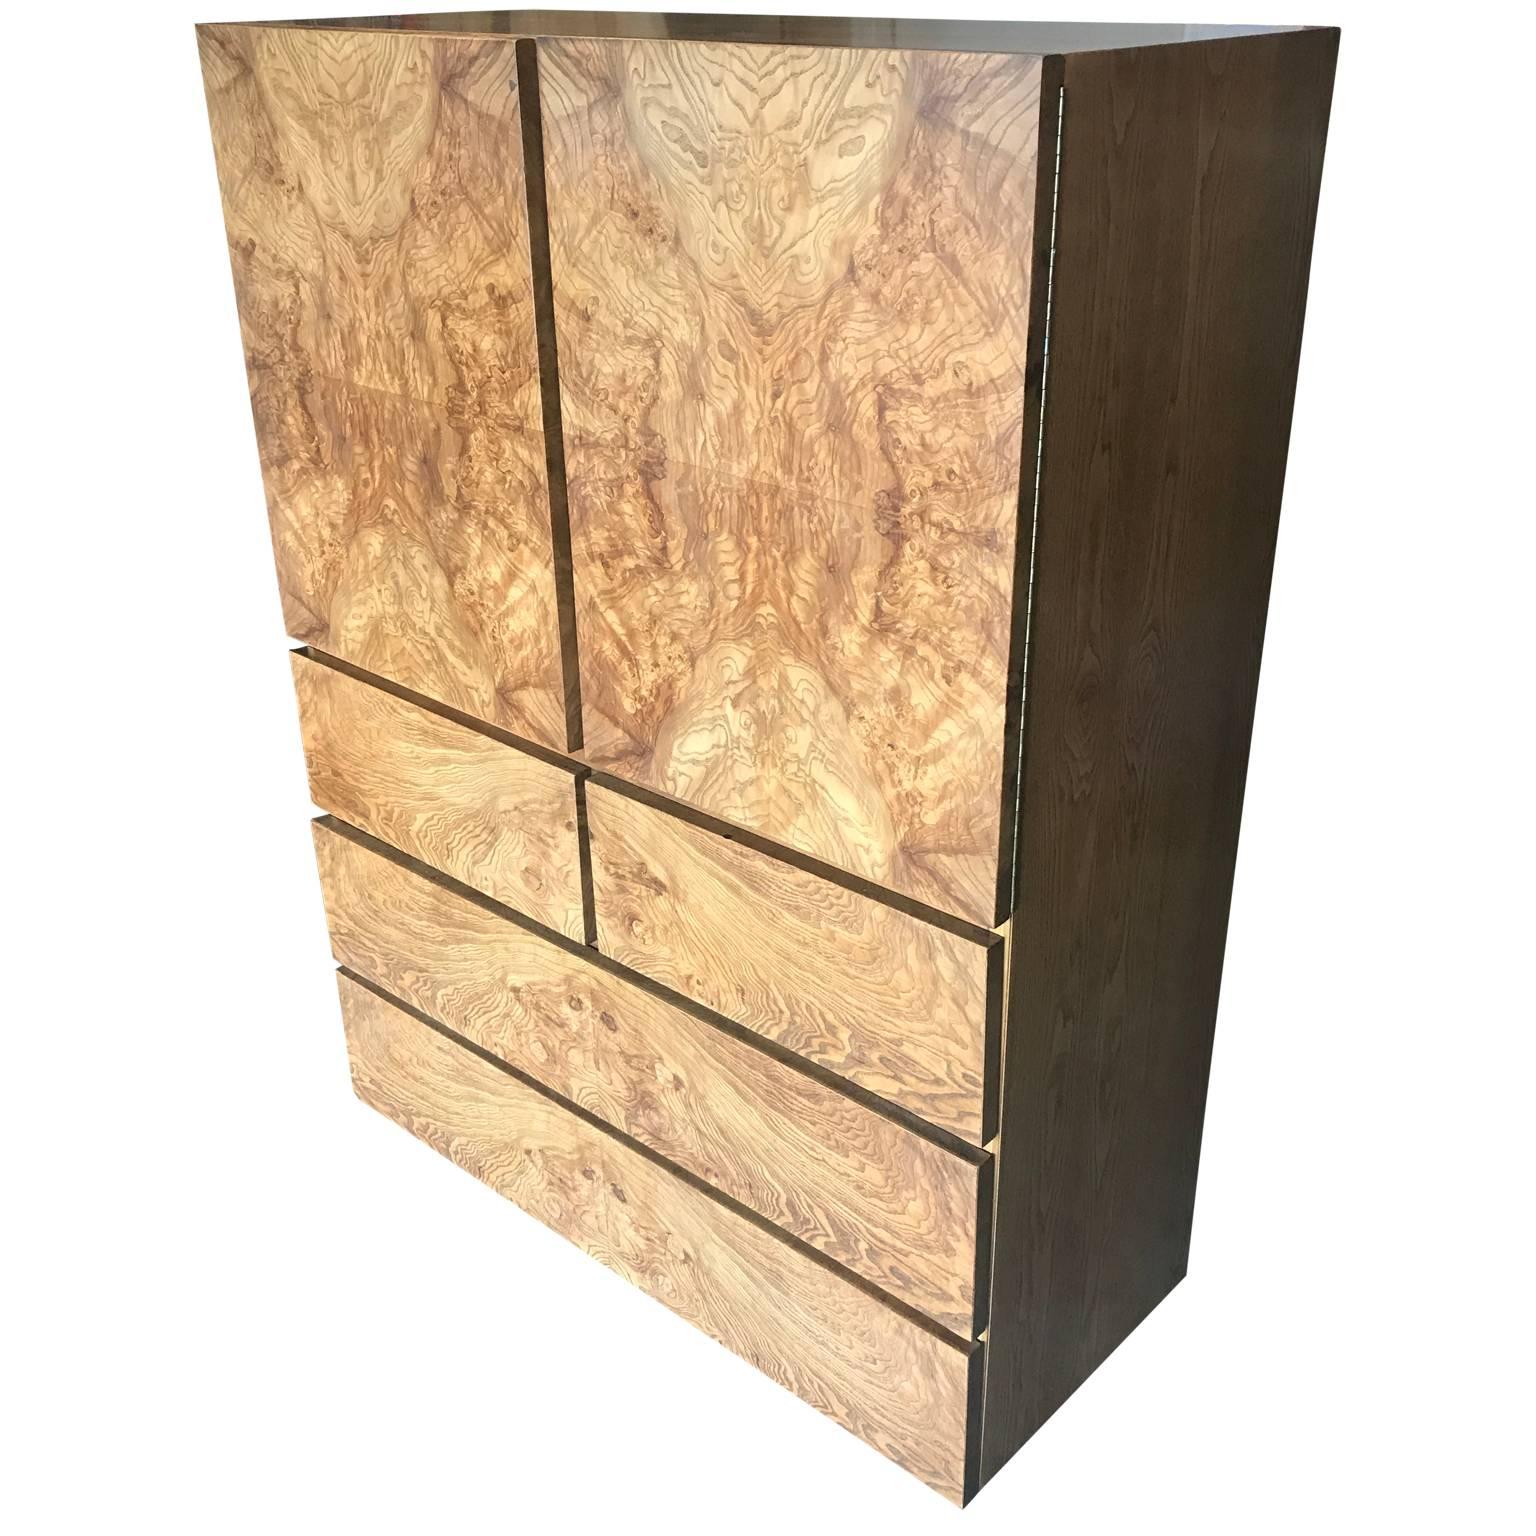 Burl-wood Cabinet.  This piece is part of the 